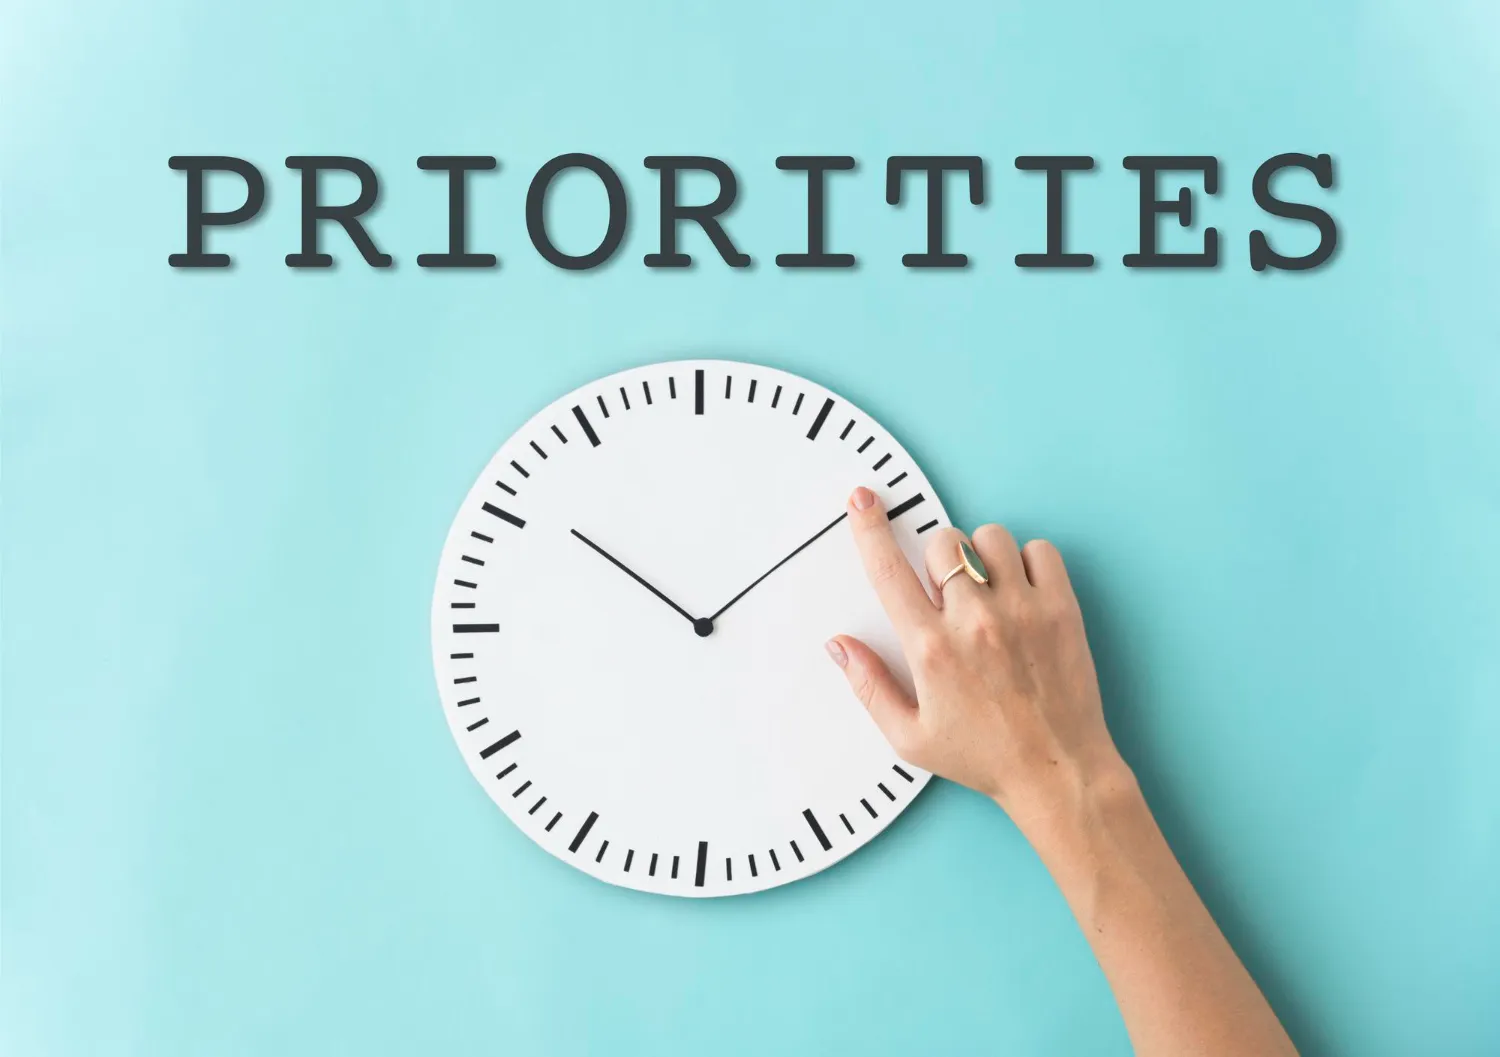 A hand adjusting a minimalist clock with the word 'PRIORITIES' above it, symbolizing the importance of time management for productivity, as featured in JOH Partners' blog on effective time management strategies.